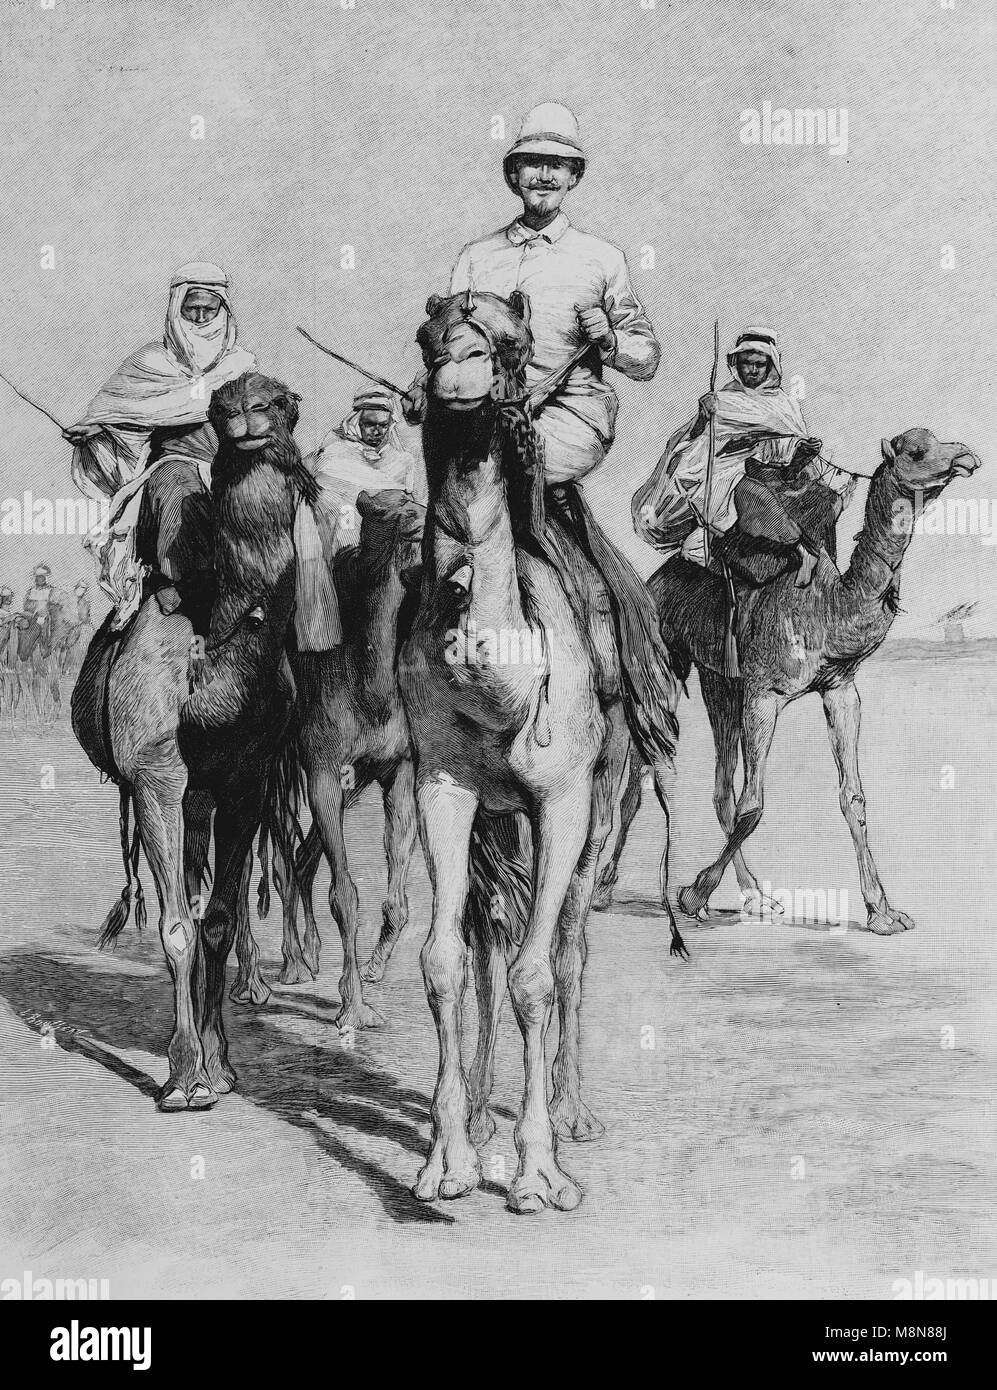 French Explorer Fernand Foureau during the Foureau-Lamy expedition in Chad in 1900, Picture from the French weekly newspaper l'Illustration, 9th September 1900 Stock Photo